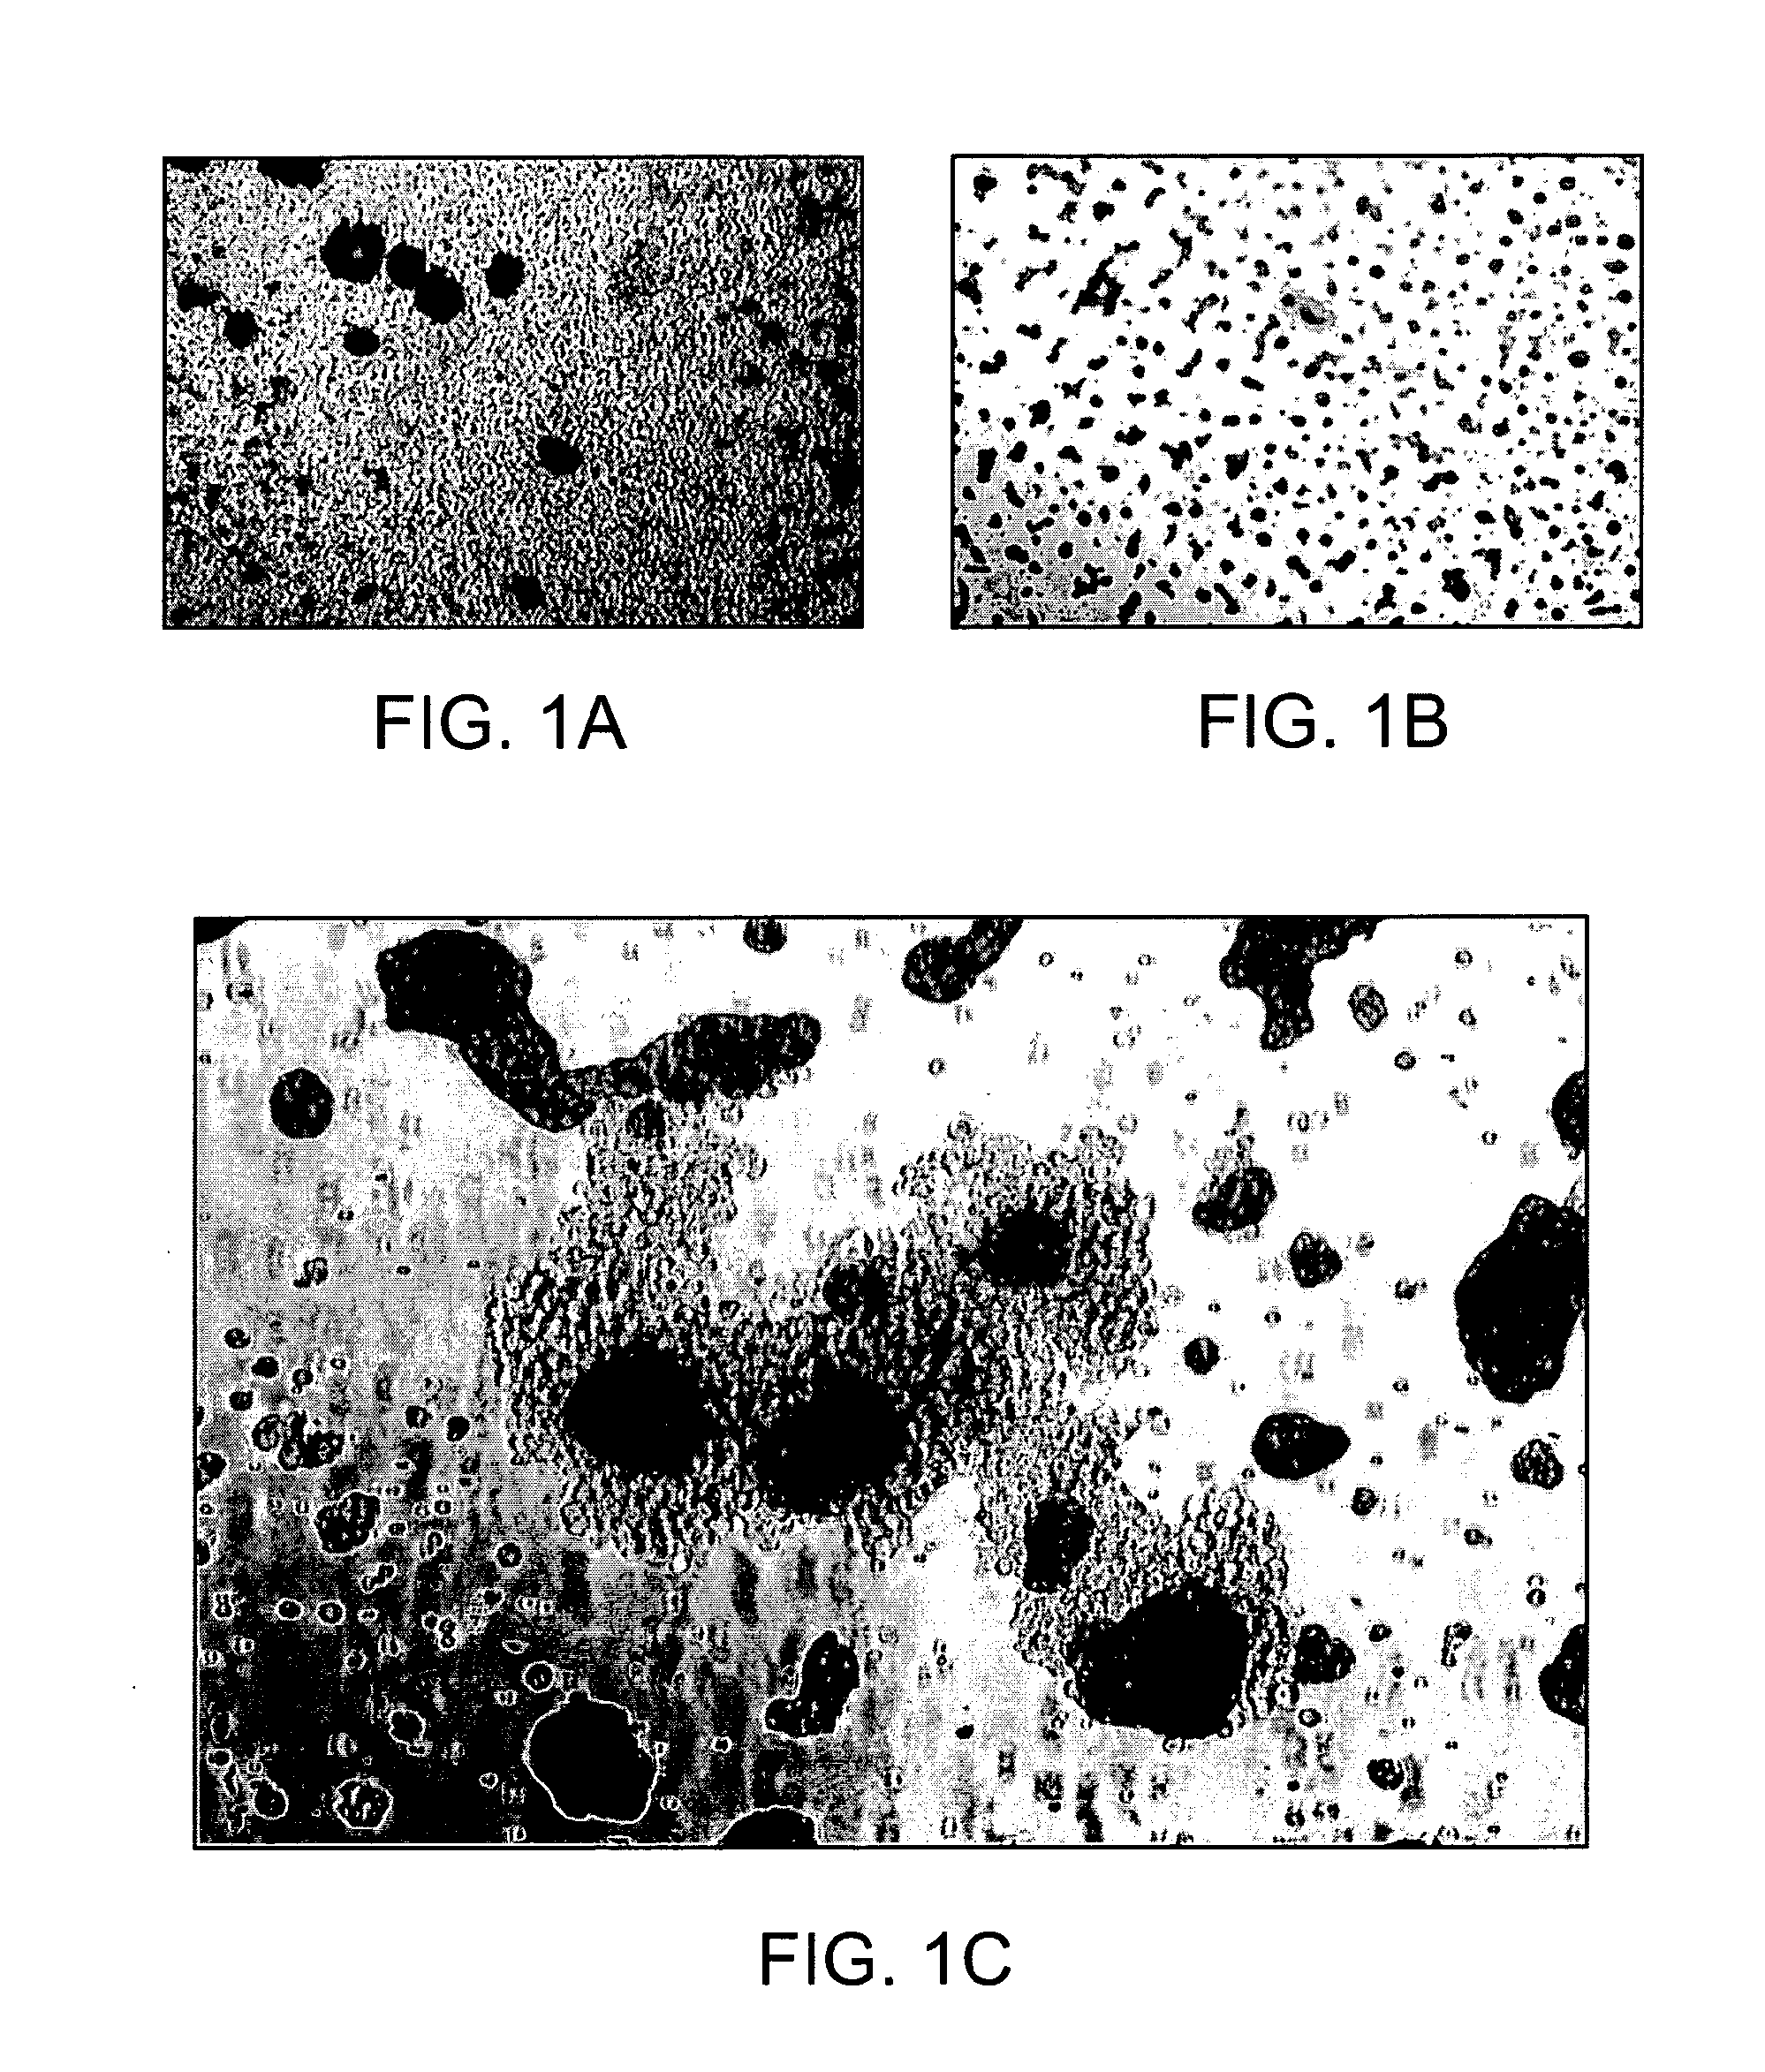 Method of Isolating Stem and Progenitor Cells From Placenta